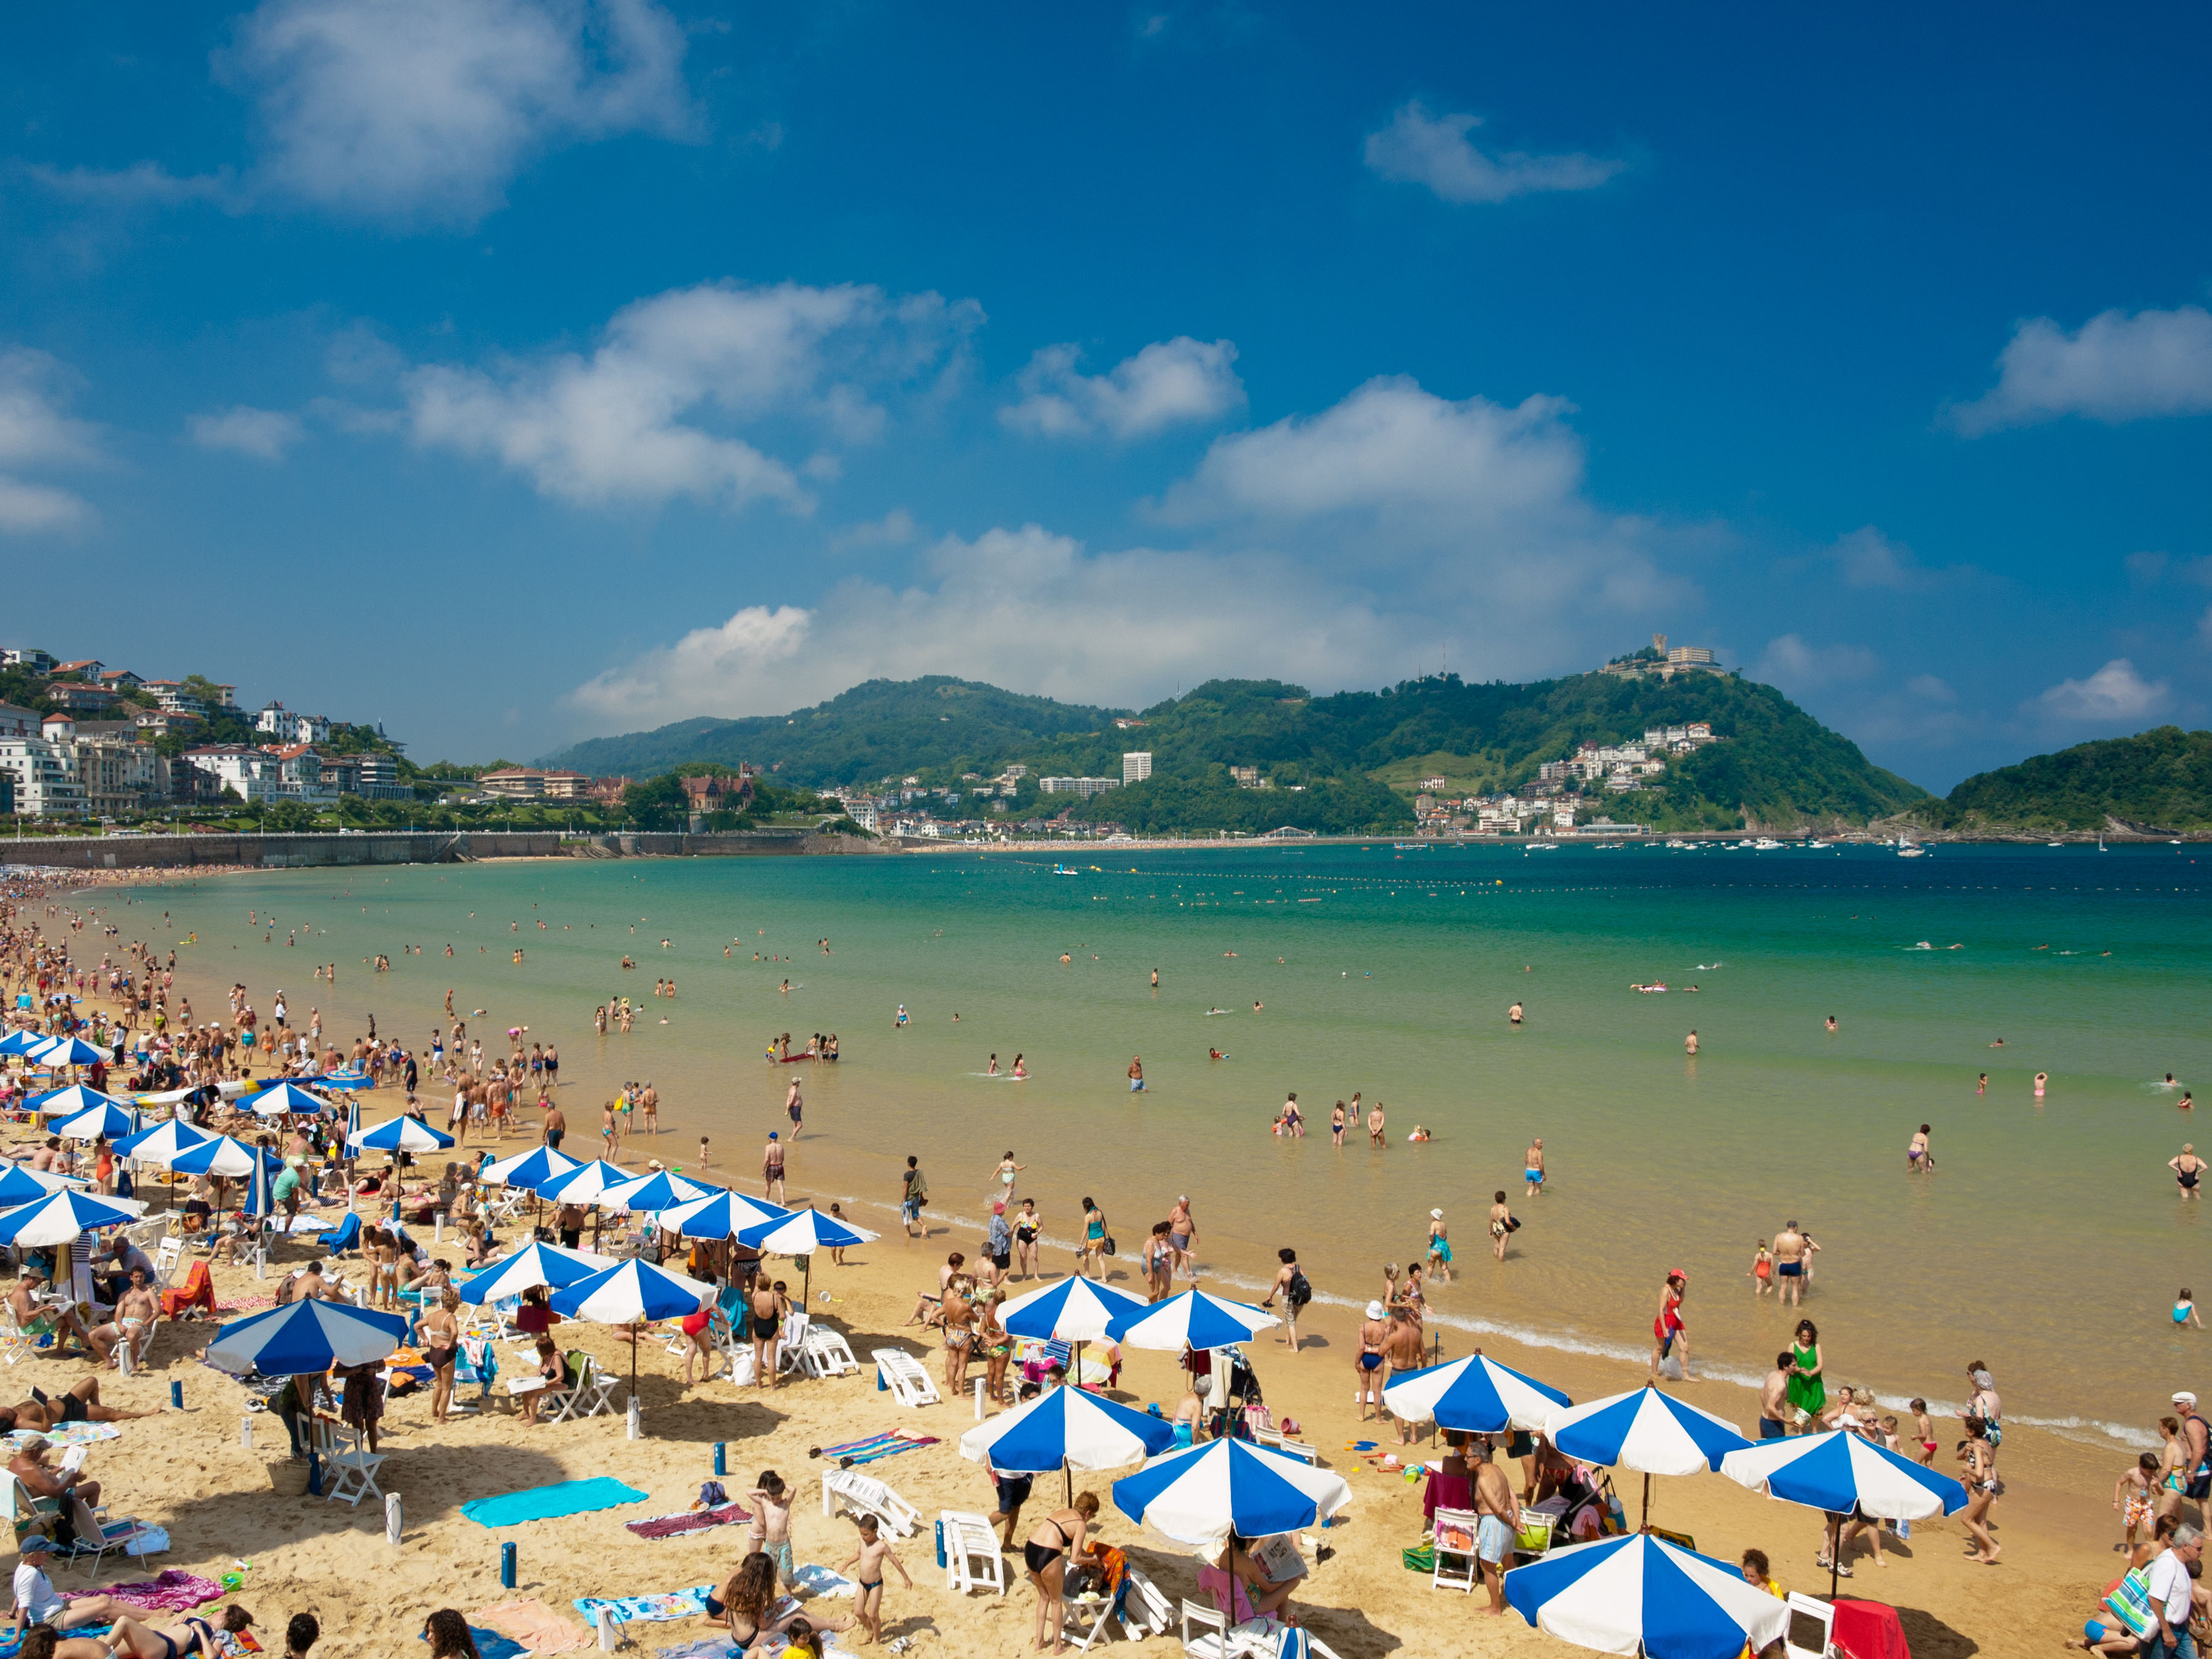 San Sebastián claimed first place with an overall score of 88 per cent